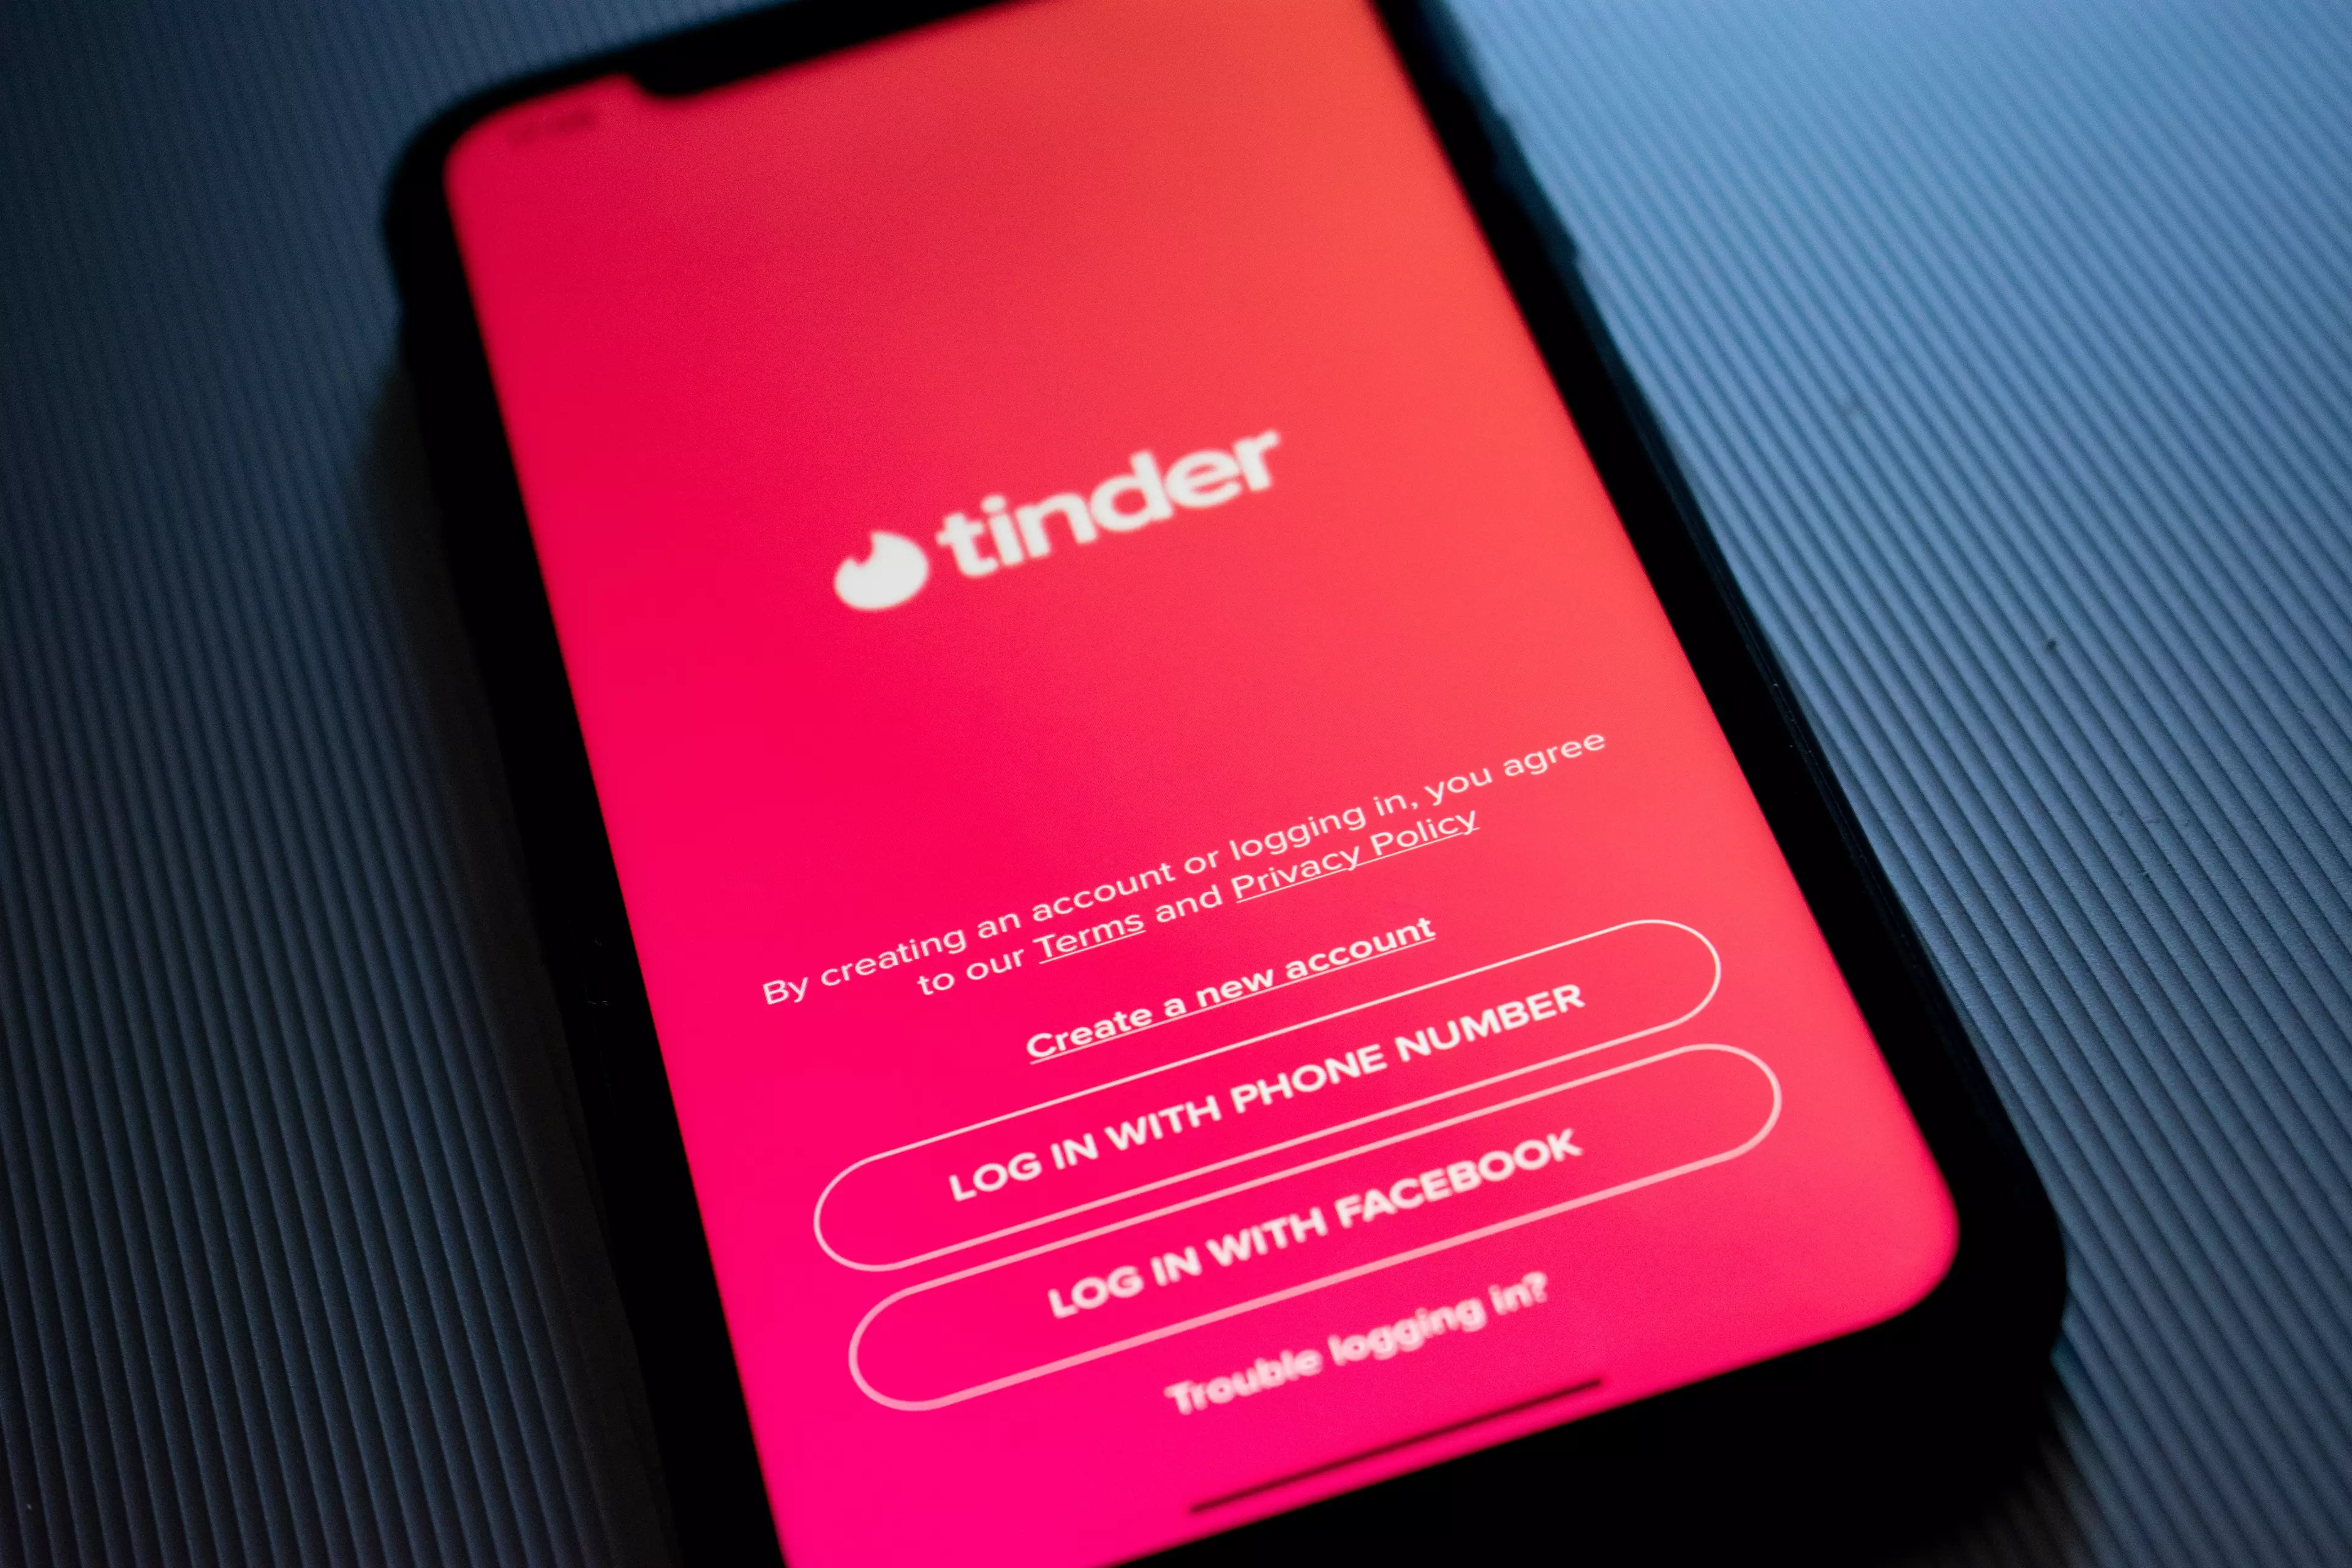 Tinder has rolled out a blue tick system (